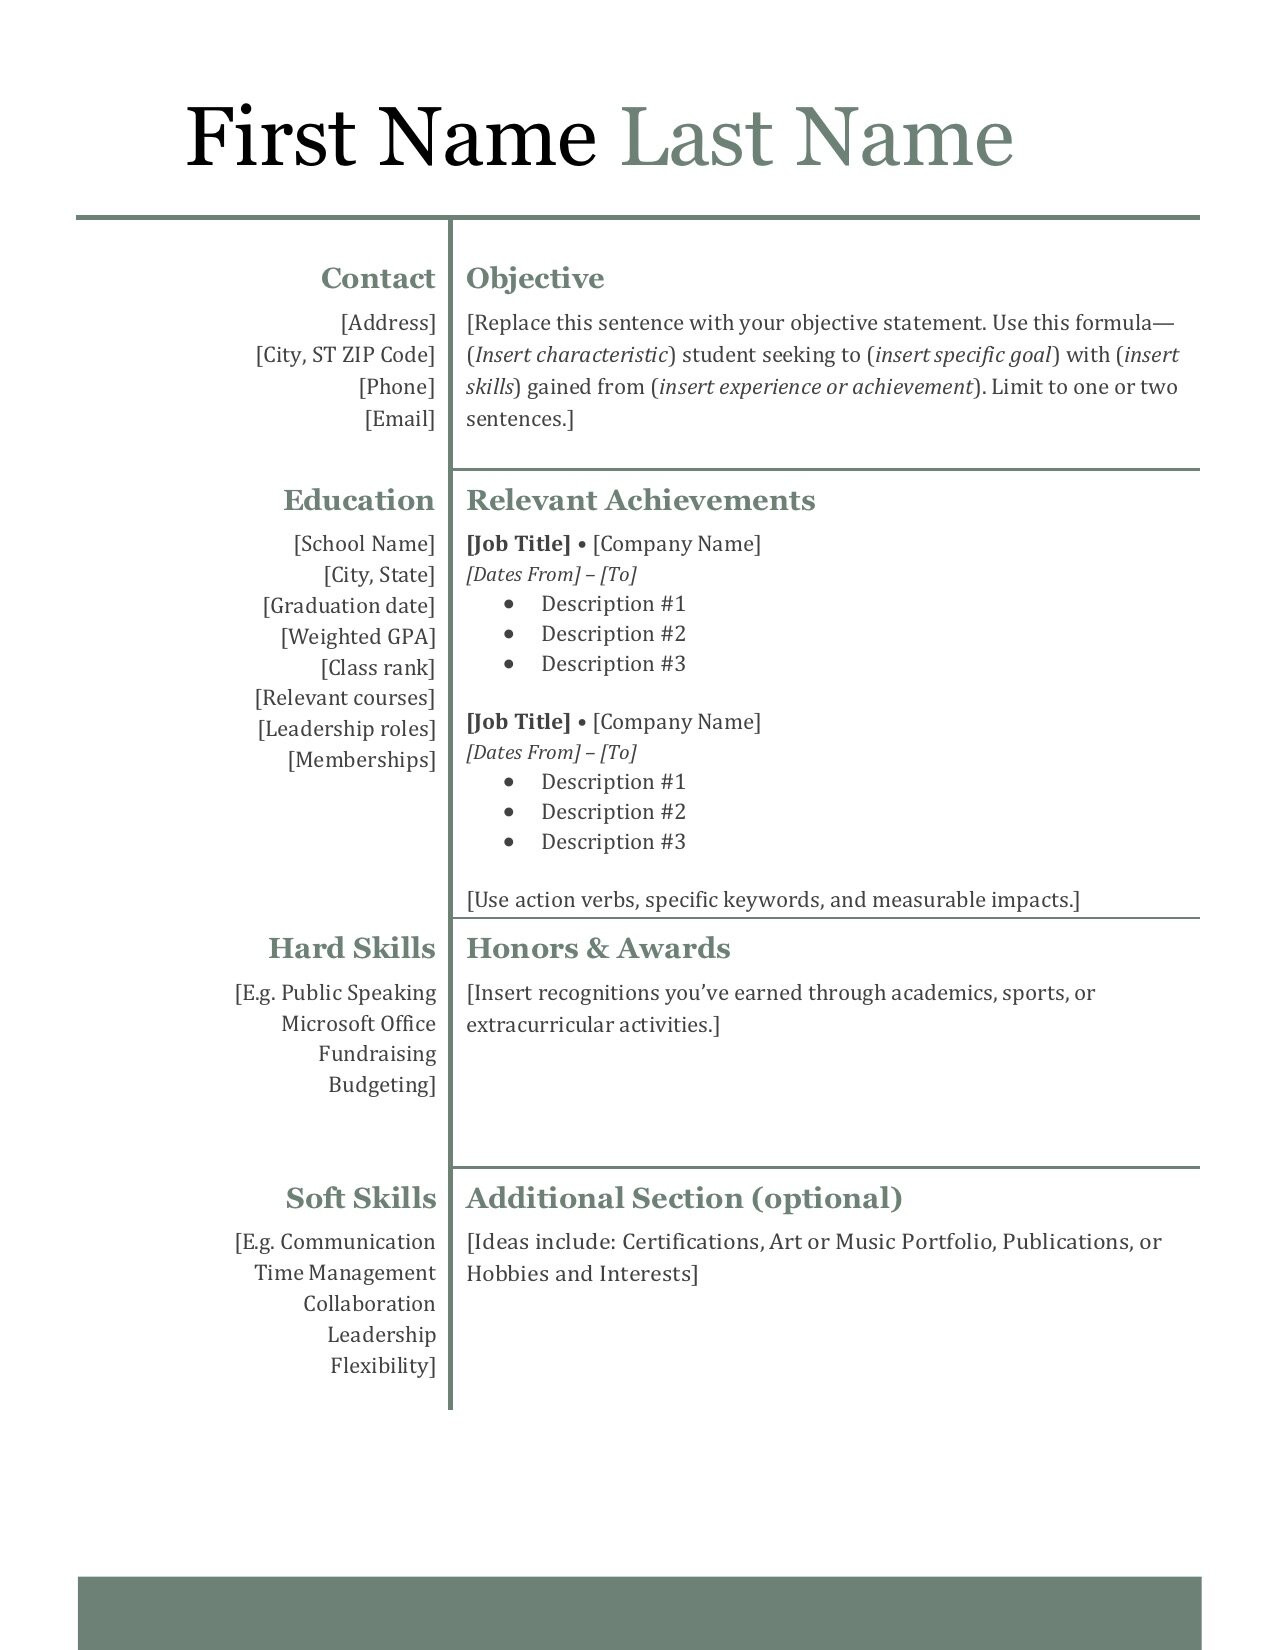 Sample Resume for High School Student for College How to Write An Impressive High School Resume â Shemmassian …